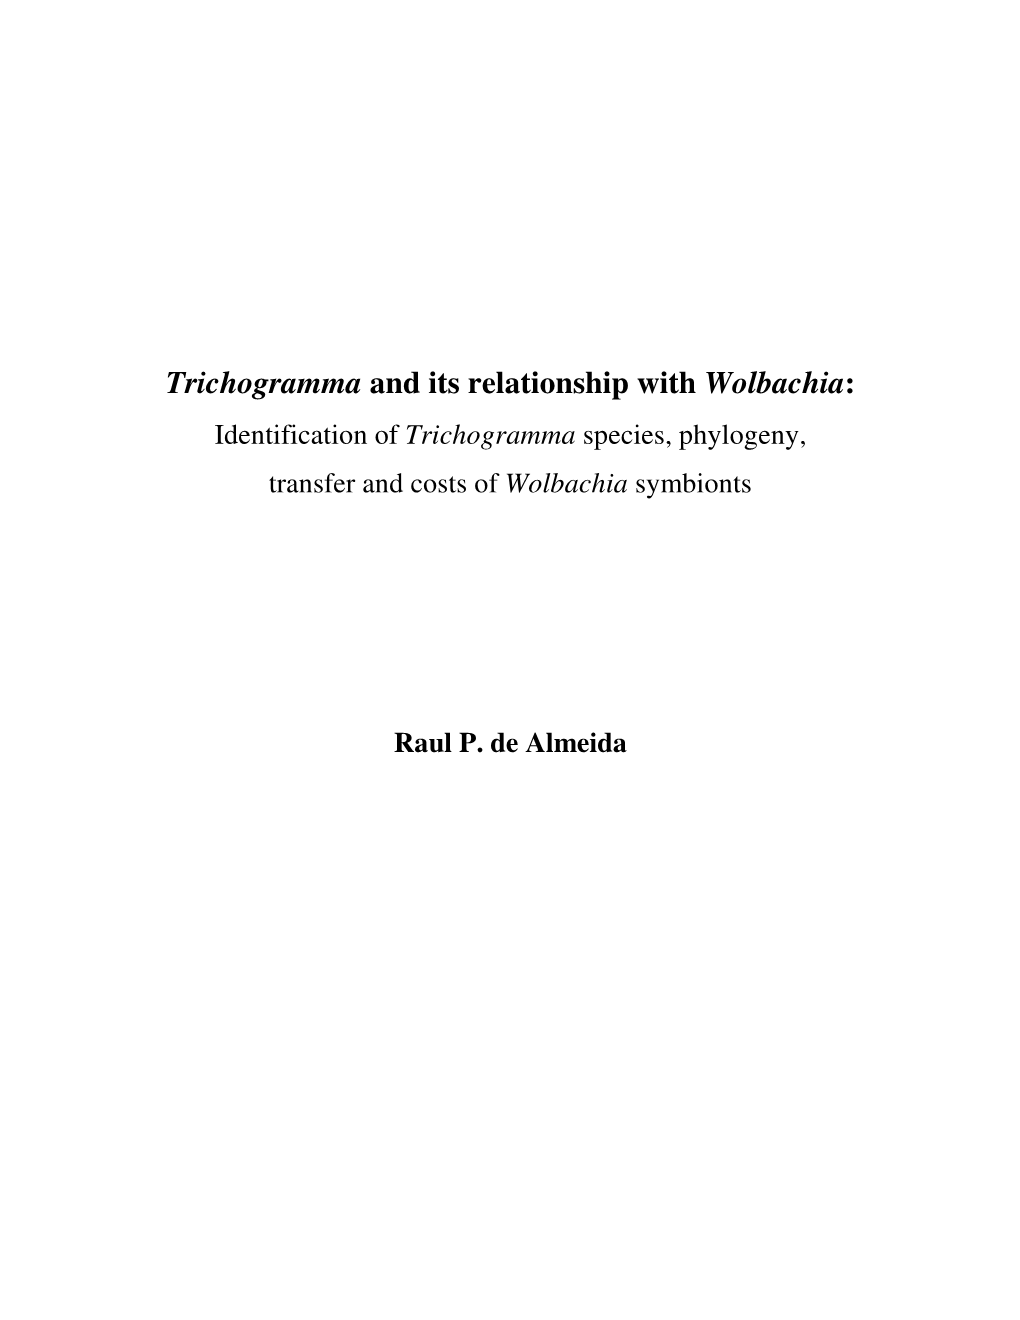 Trichogramma and Its Relationship with Wolbachia: Identification of Trichogramma Species, Phylogeny, Transfer and Costs of Wolbachia Symbionts